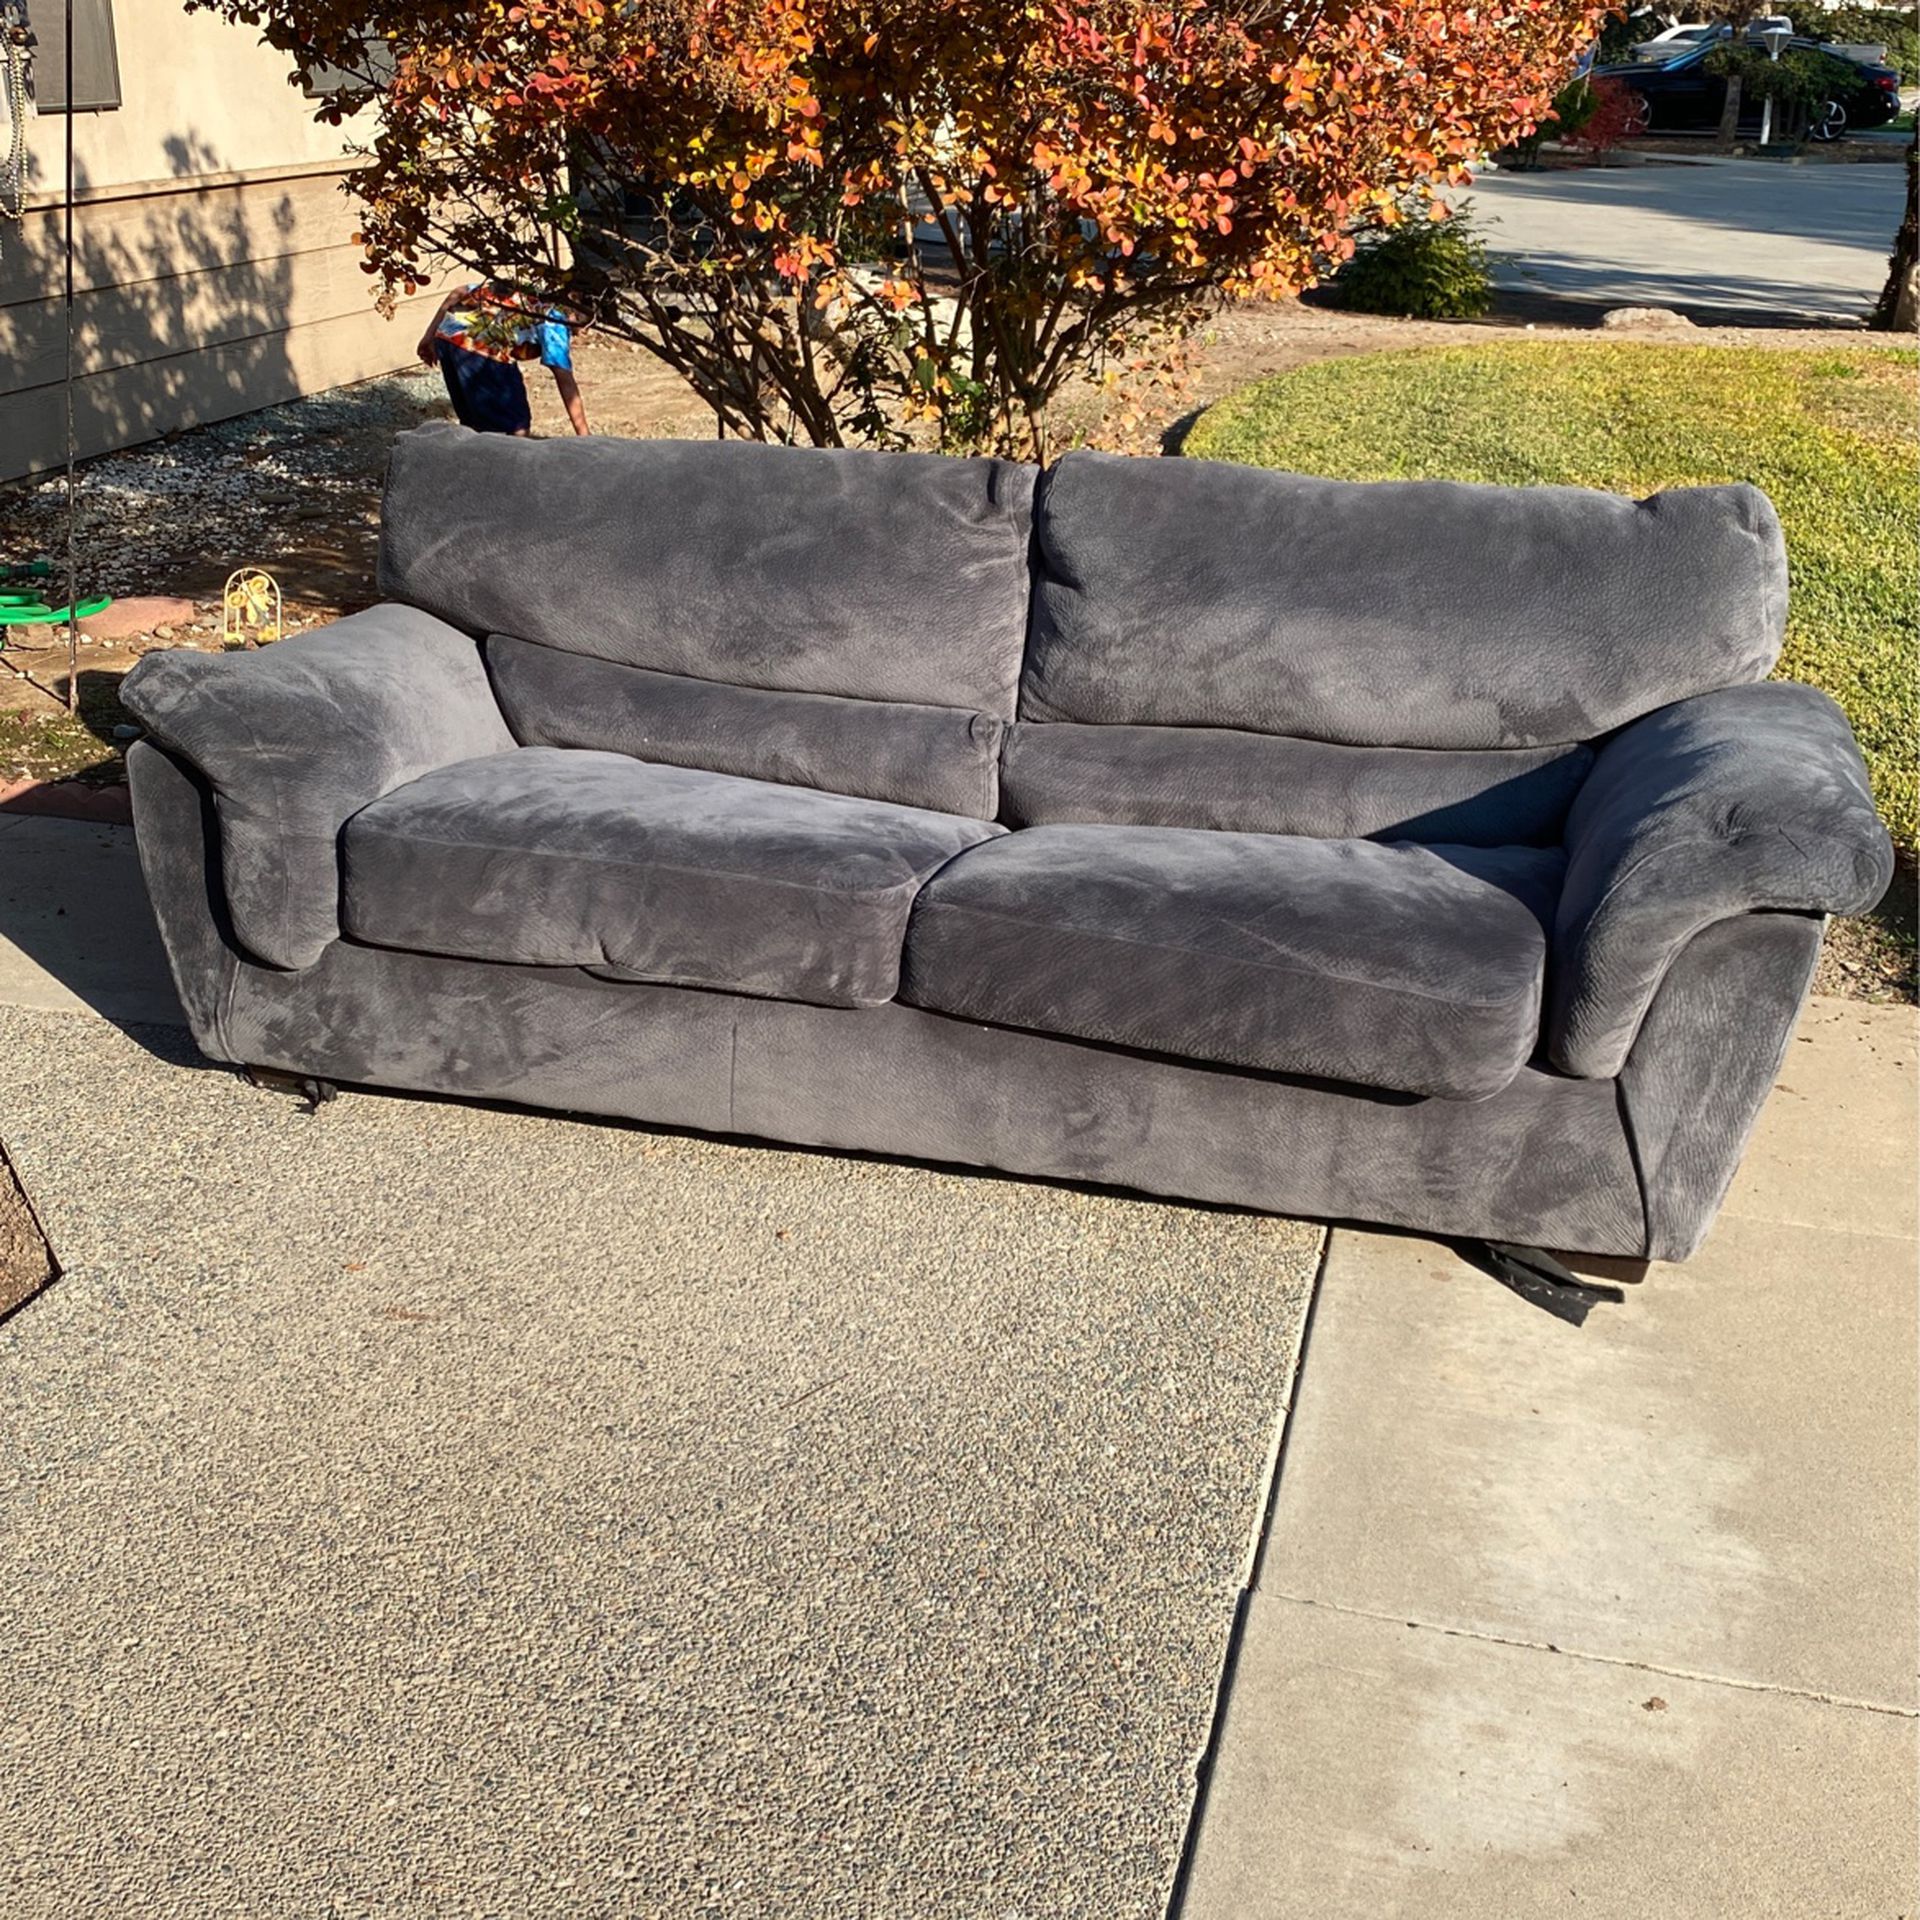 Free Couch !!!